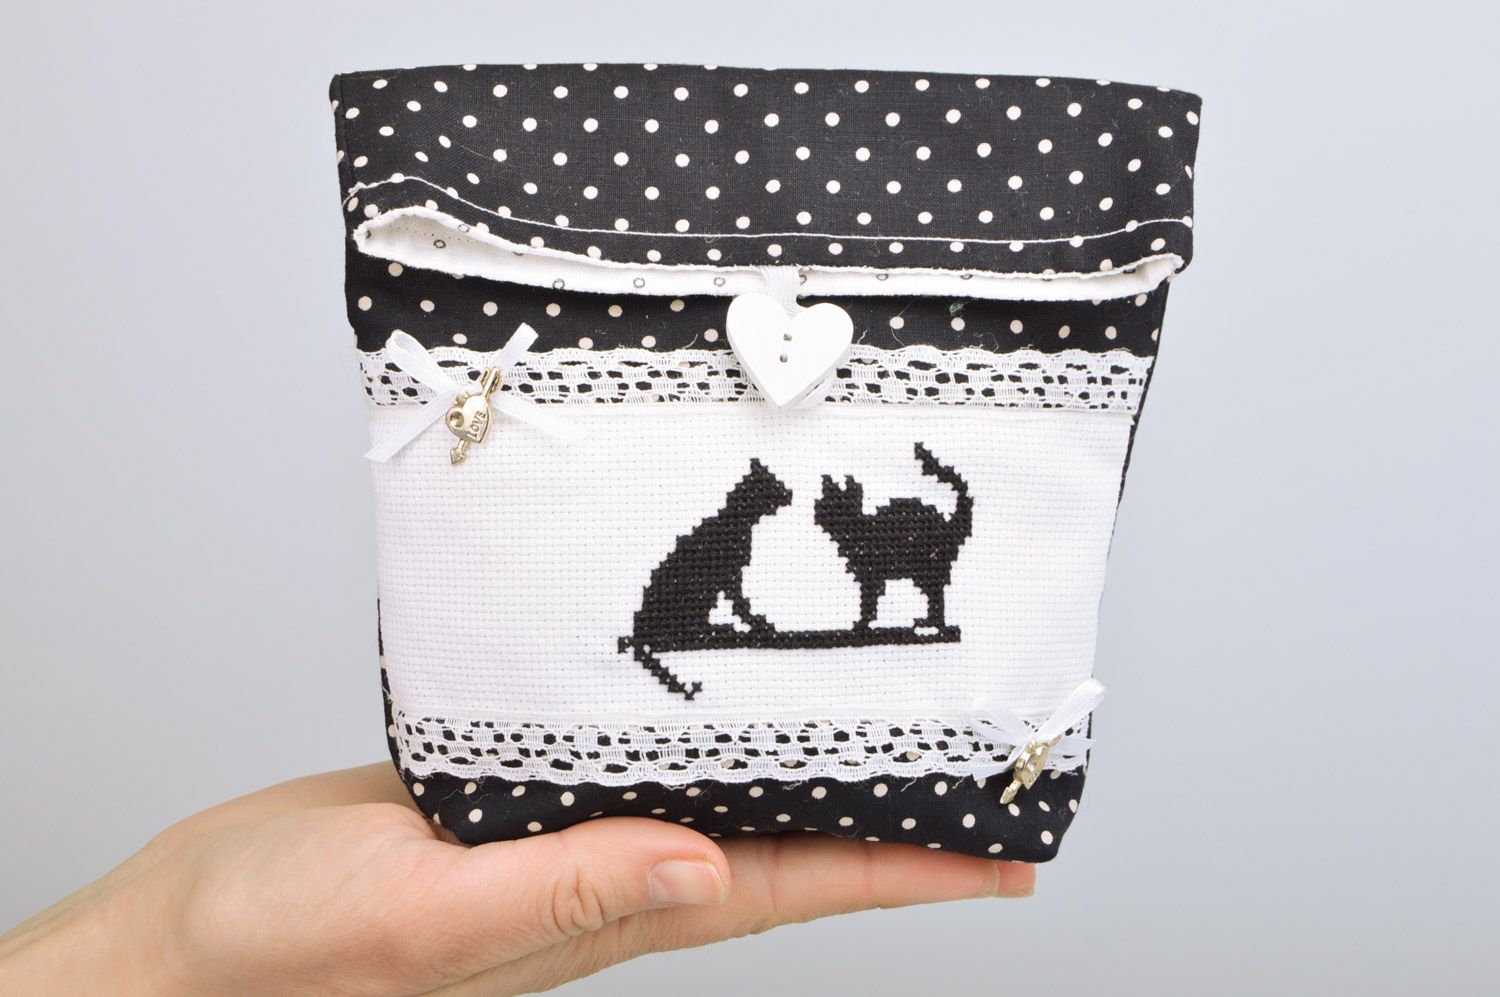 Handmade cosmetics bag sewn of polka dot cotton with cross stitch embroidery  photo 3